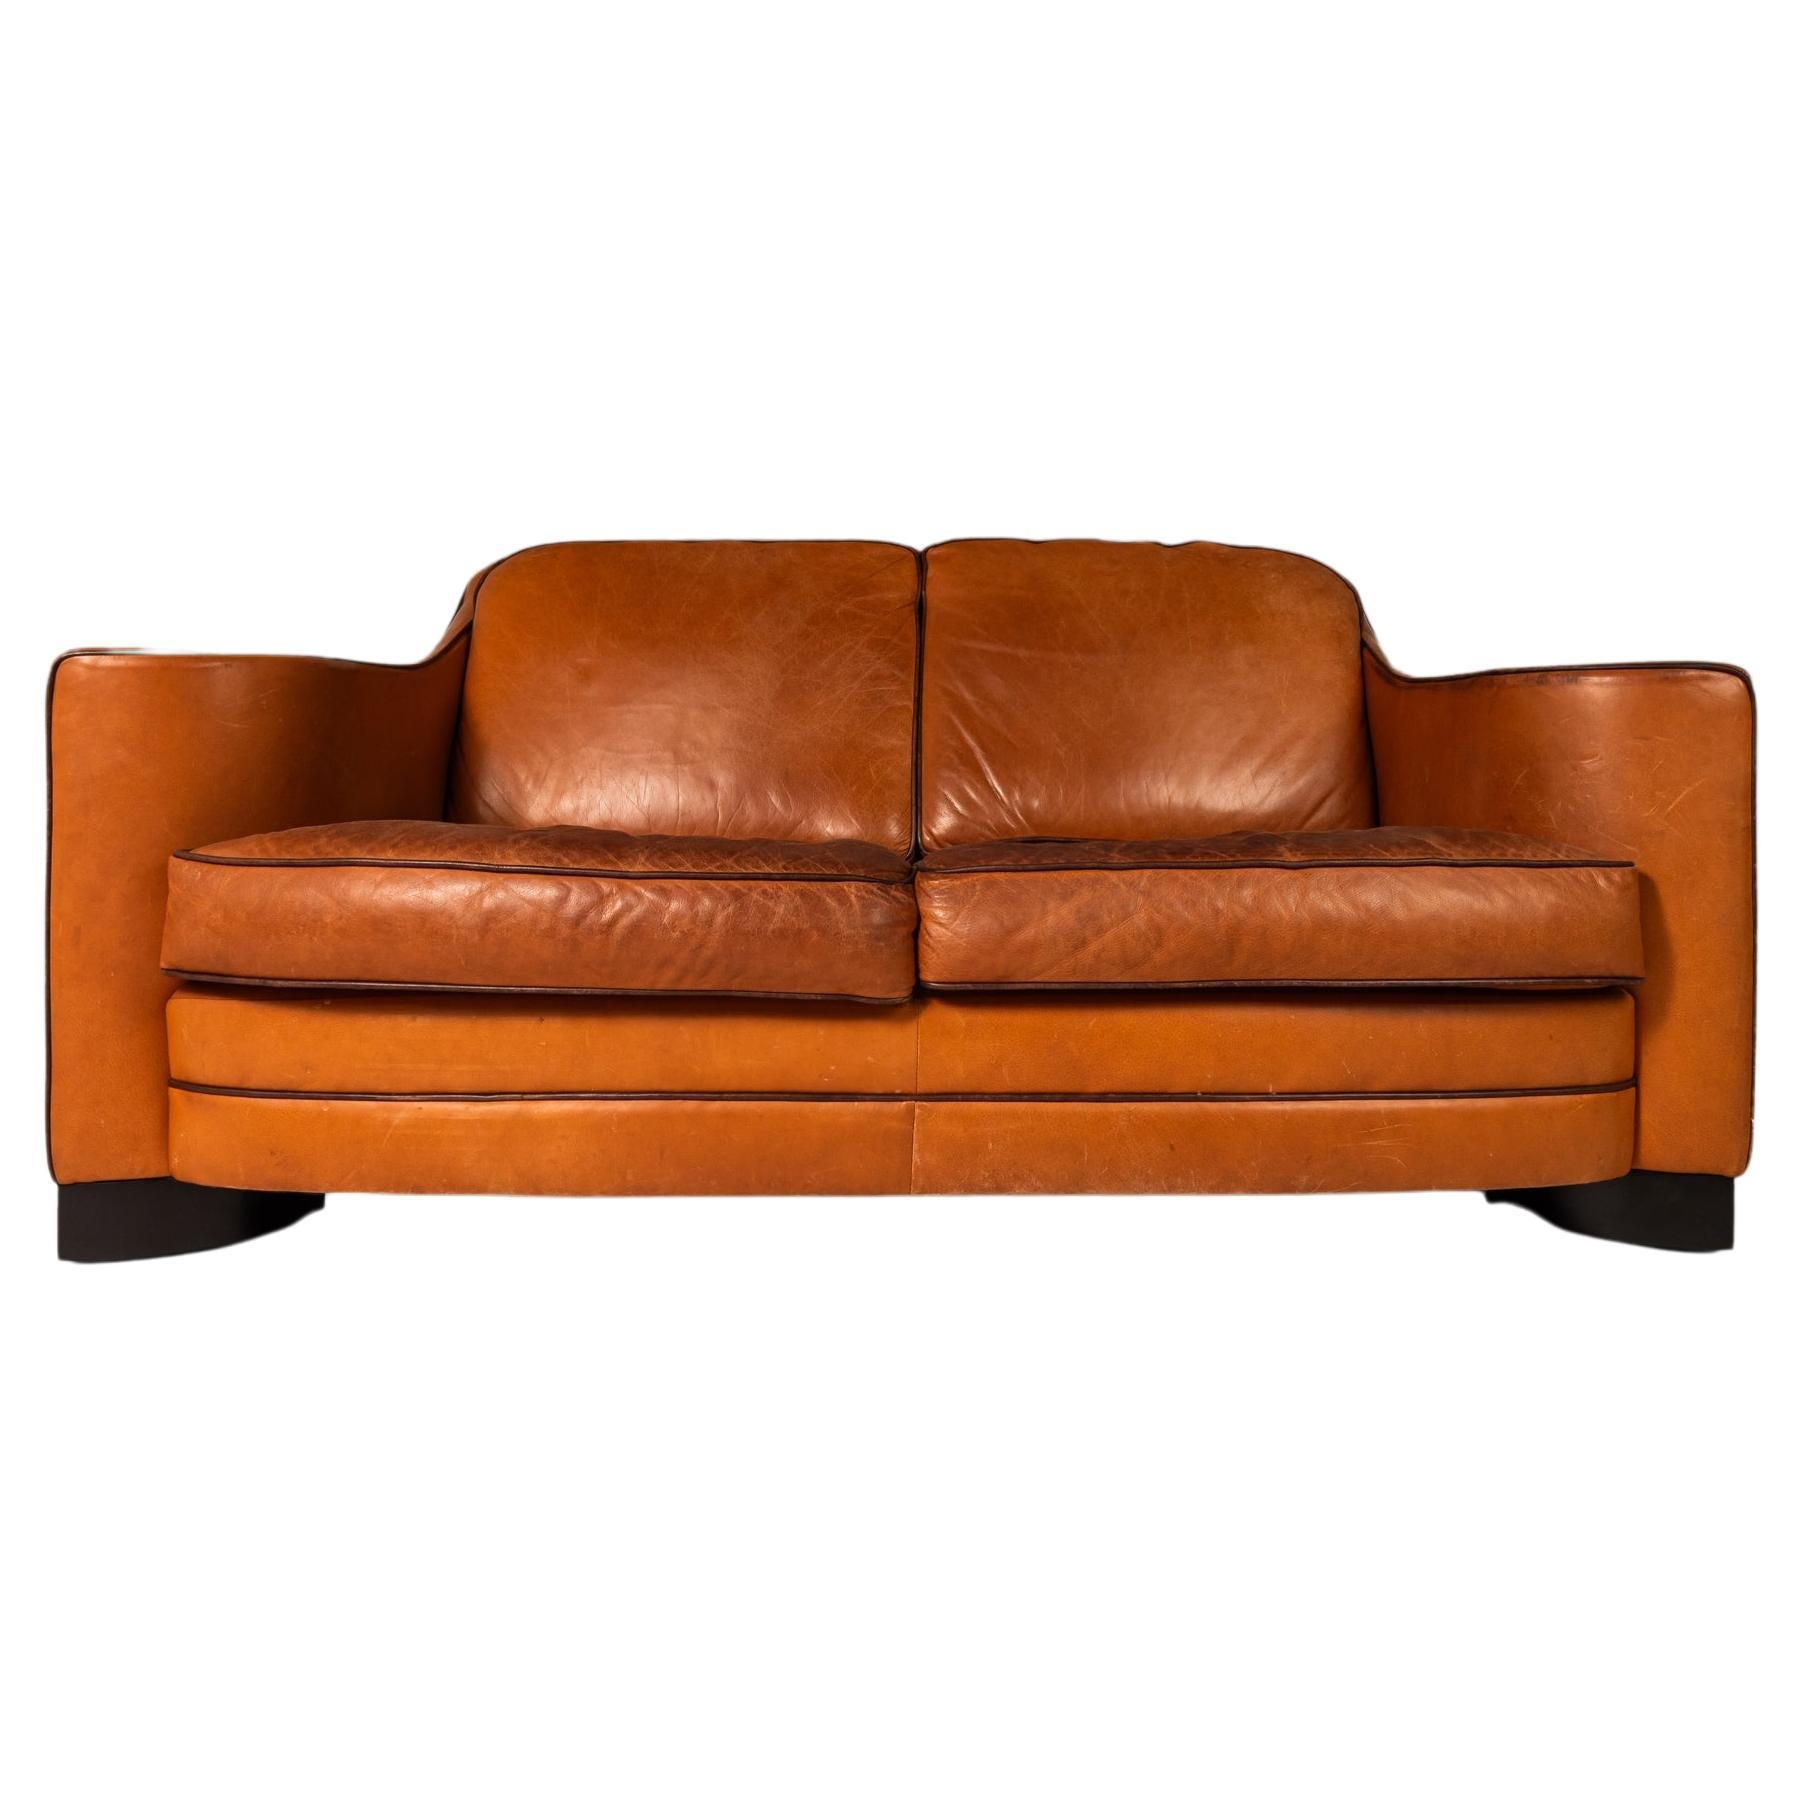 Art Deco Loveseat Sofa with Sculptural Arms in Patinaed Leather, USA, c. 1970s For Sale